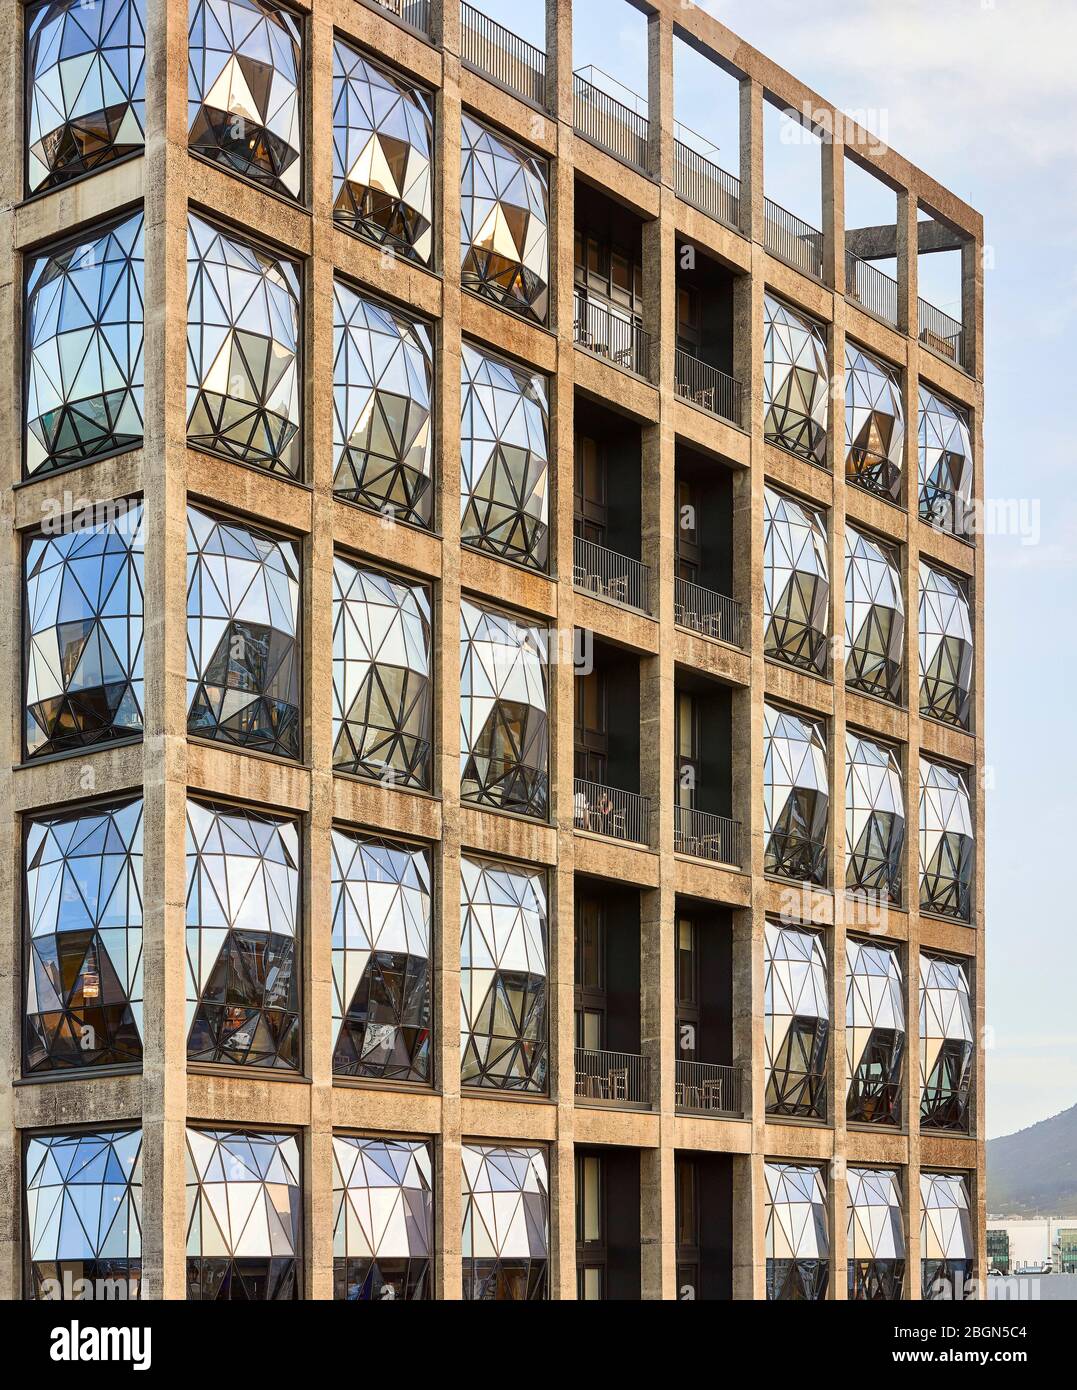 Close-up of glass-faceted windows. Zeitz MOCAA, Cape Town, South Africa. Architect: Heatherwick Studio, 2017. Stock Photo